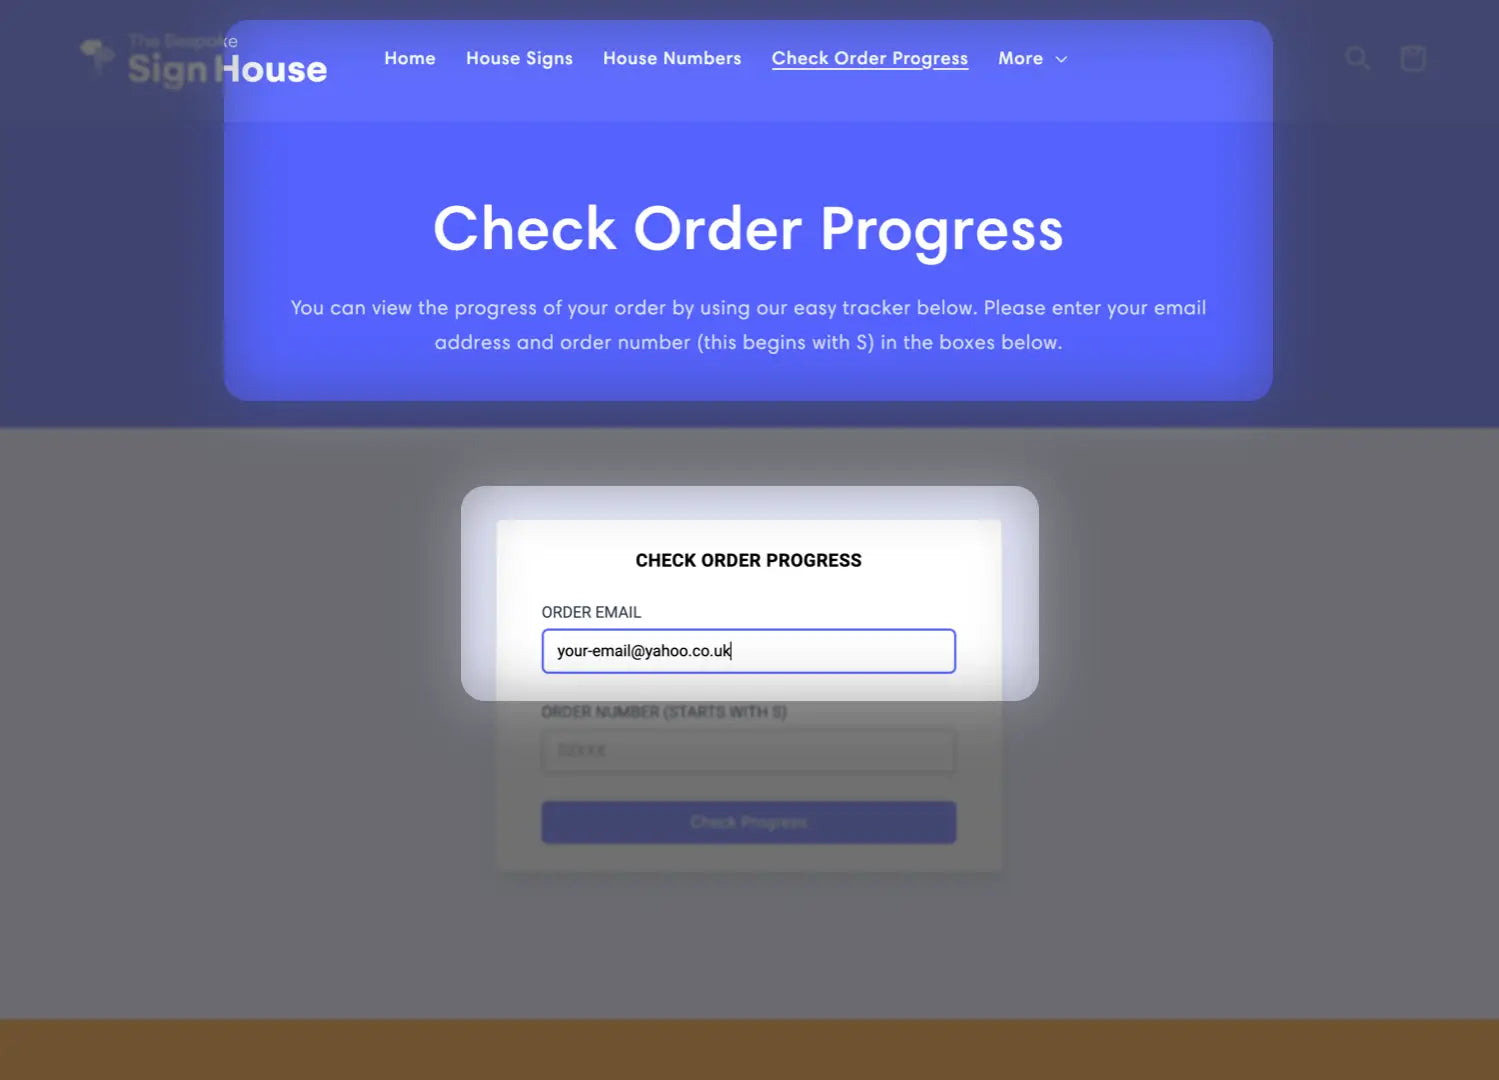 screenshot of where to type your email address on the bespoke sign house's order status tracker